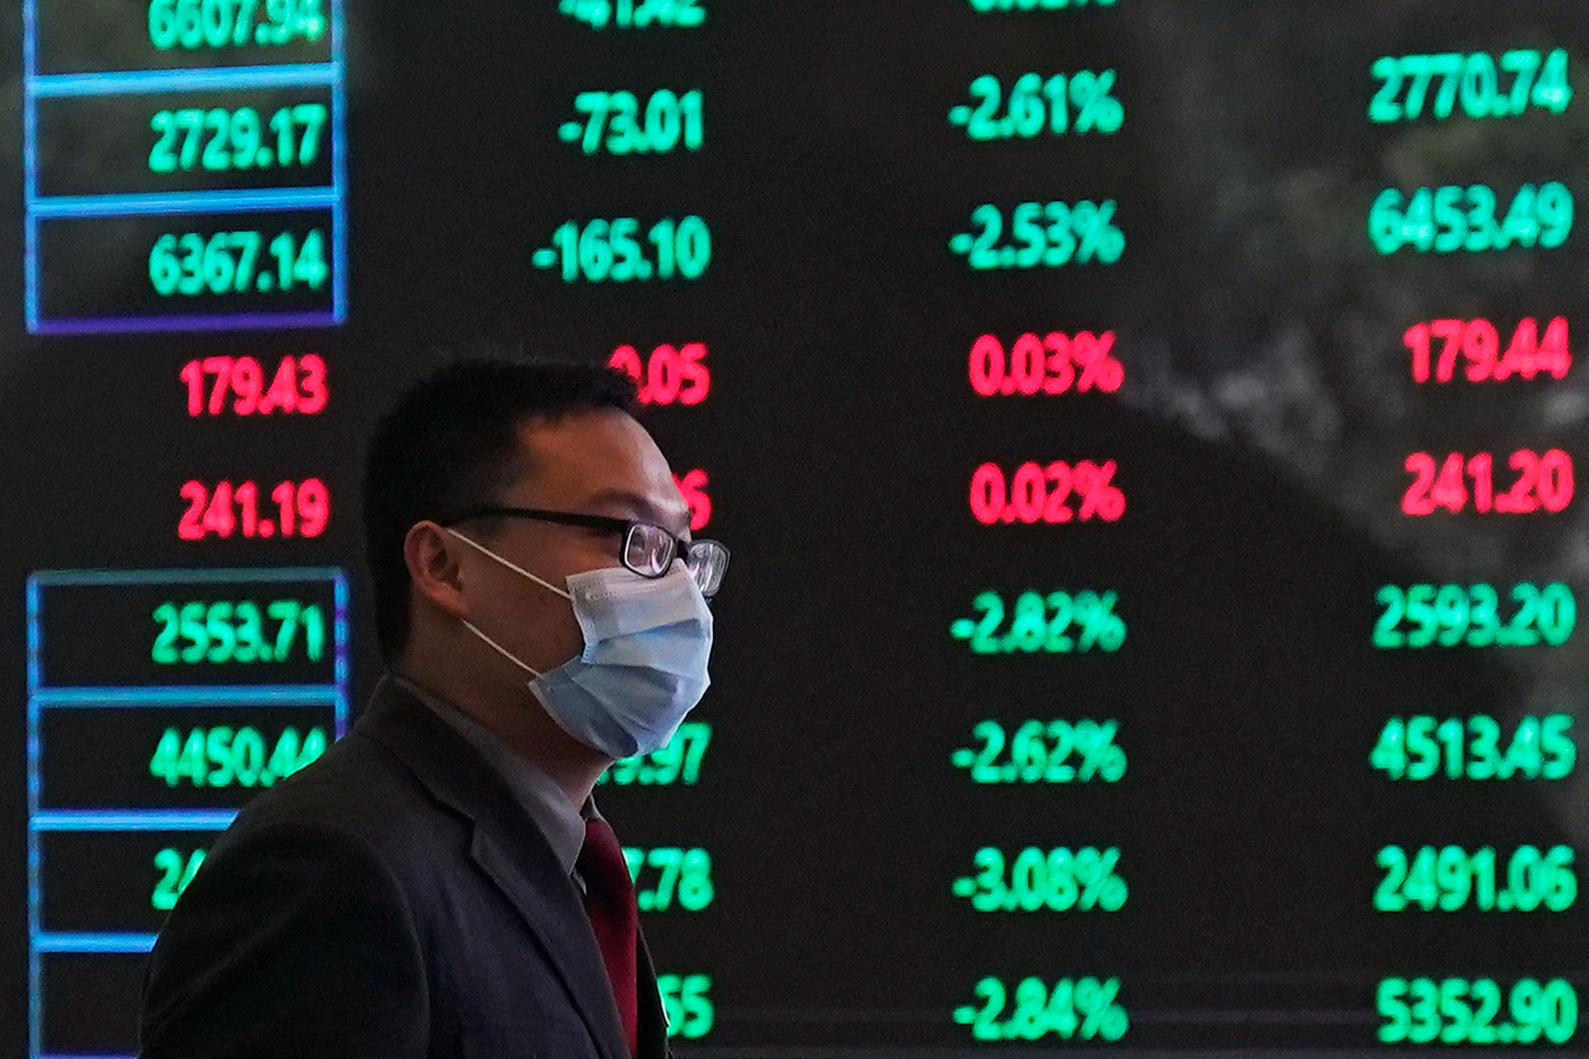 FIE PHOTO: A man wearing a protective mask is seen inside the Shanghai Stock Exchange building, at the Pudong financial district in Shanghai